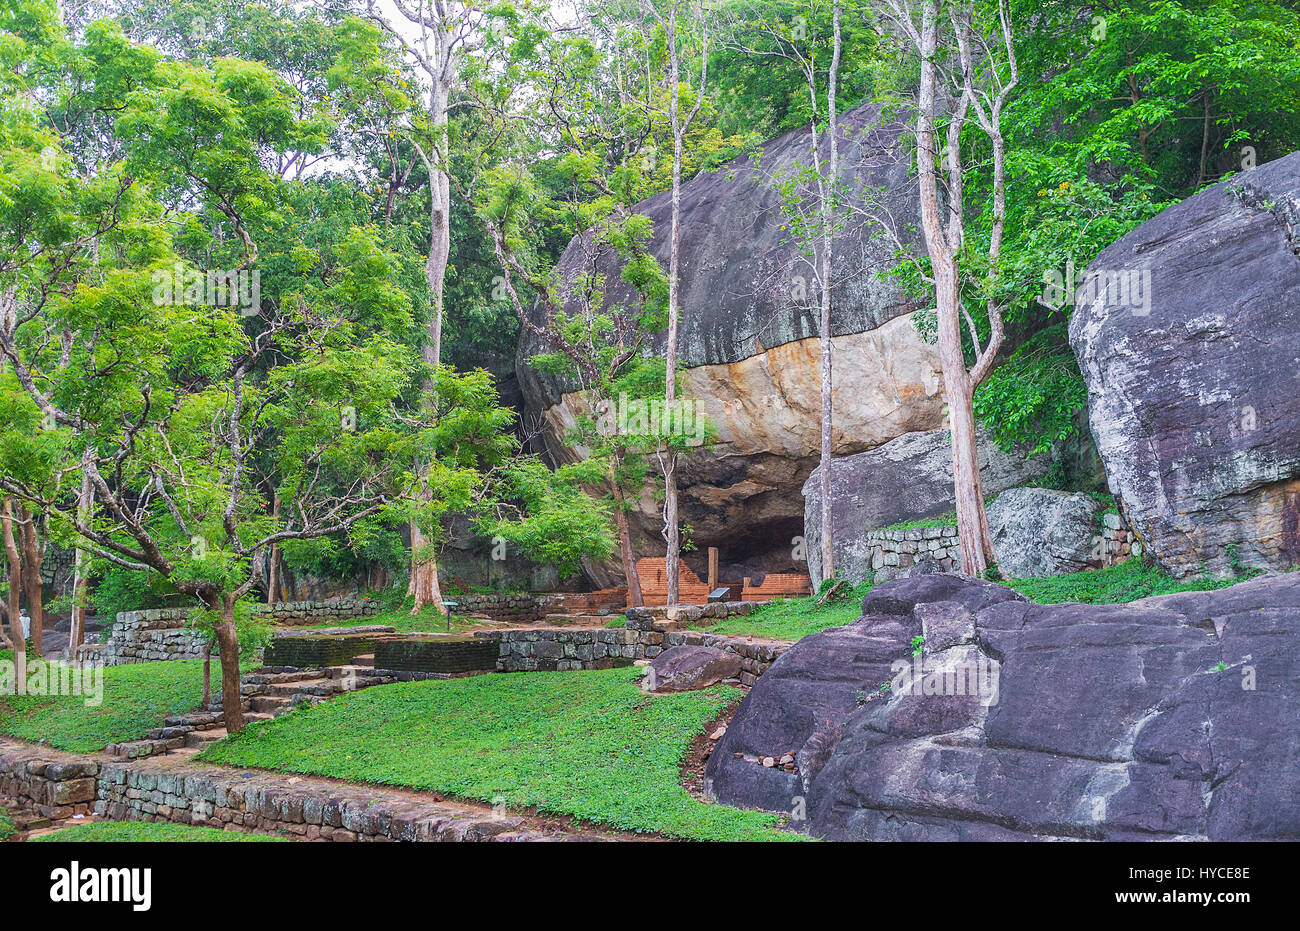 The numerous caves in Sigiriya rocks were used by Buddhist monks as shelters or temples, Sri Lanka. Stock Photo